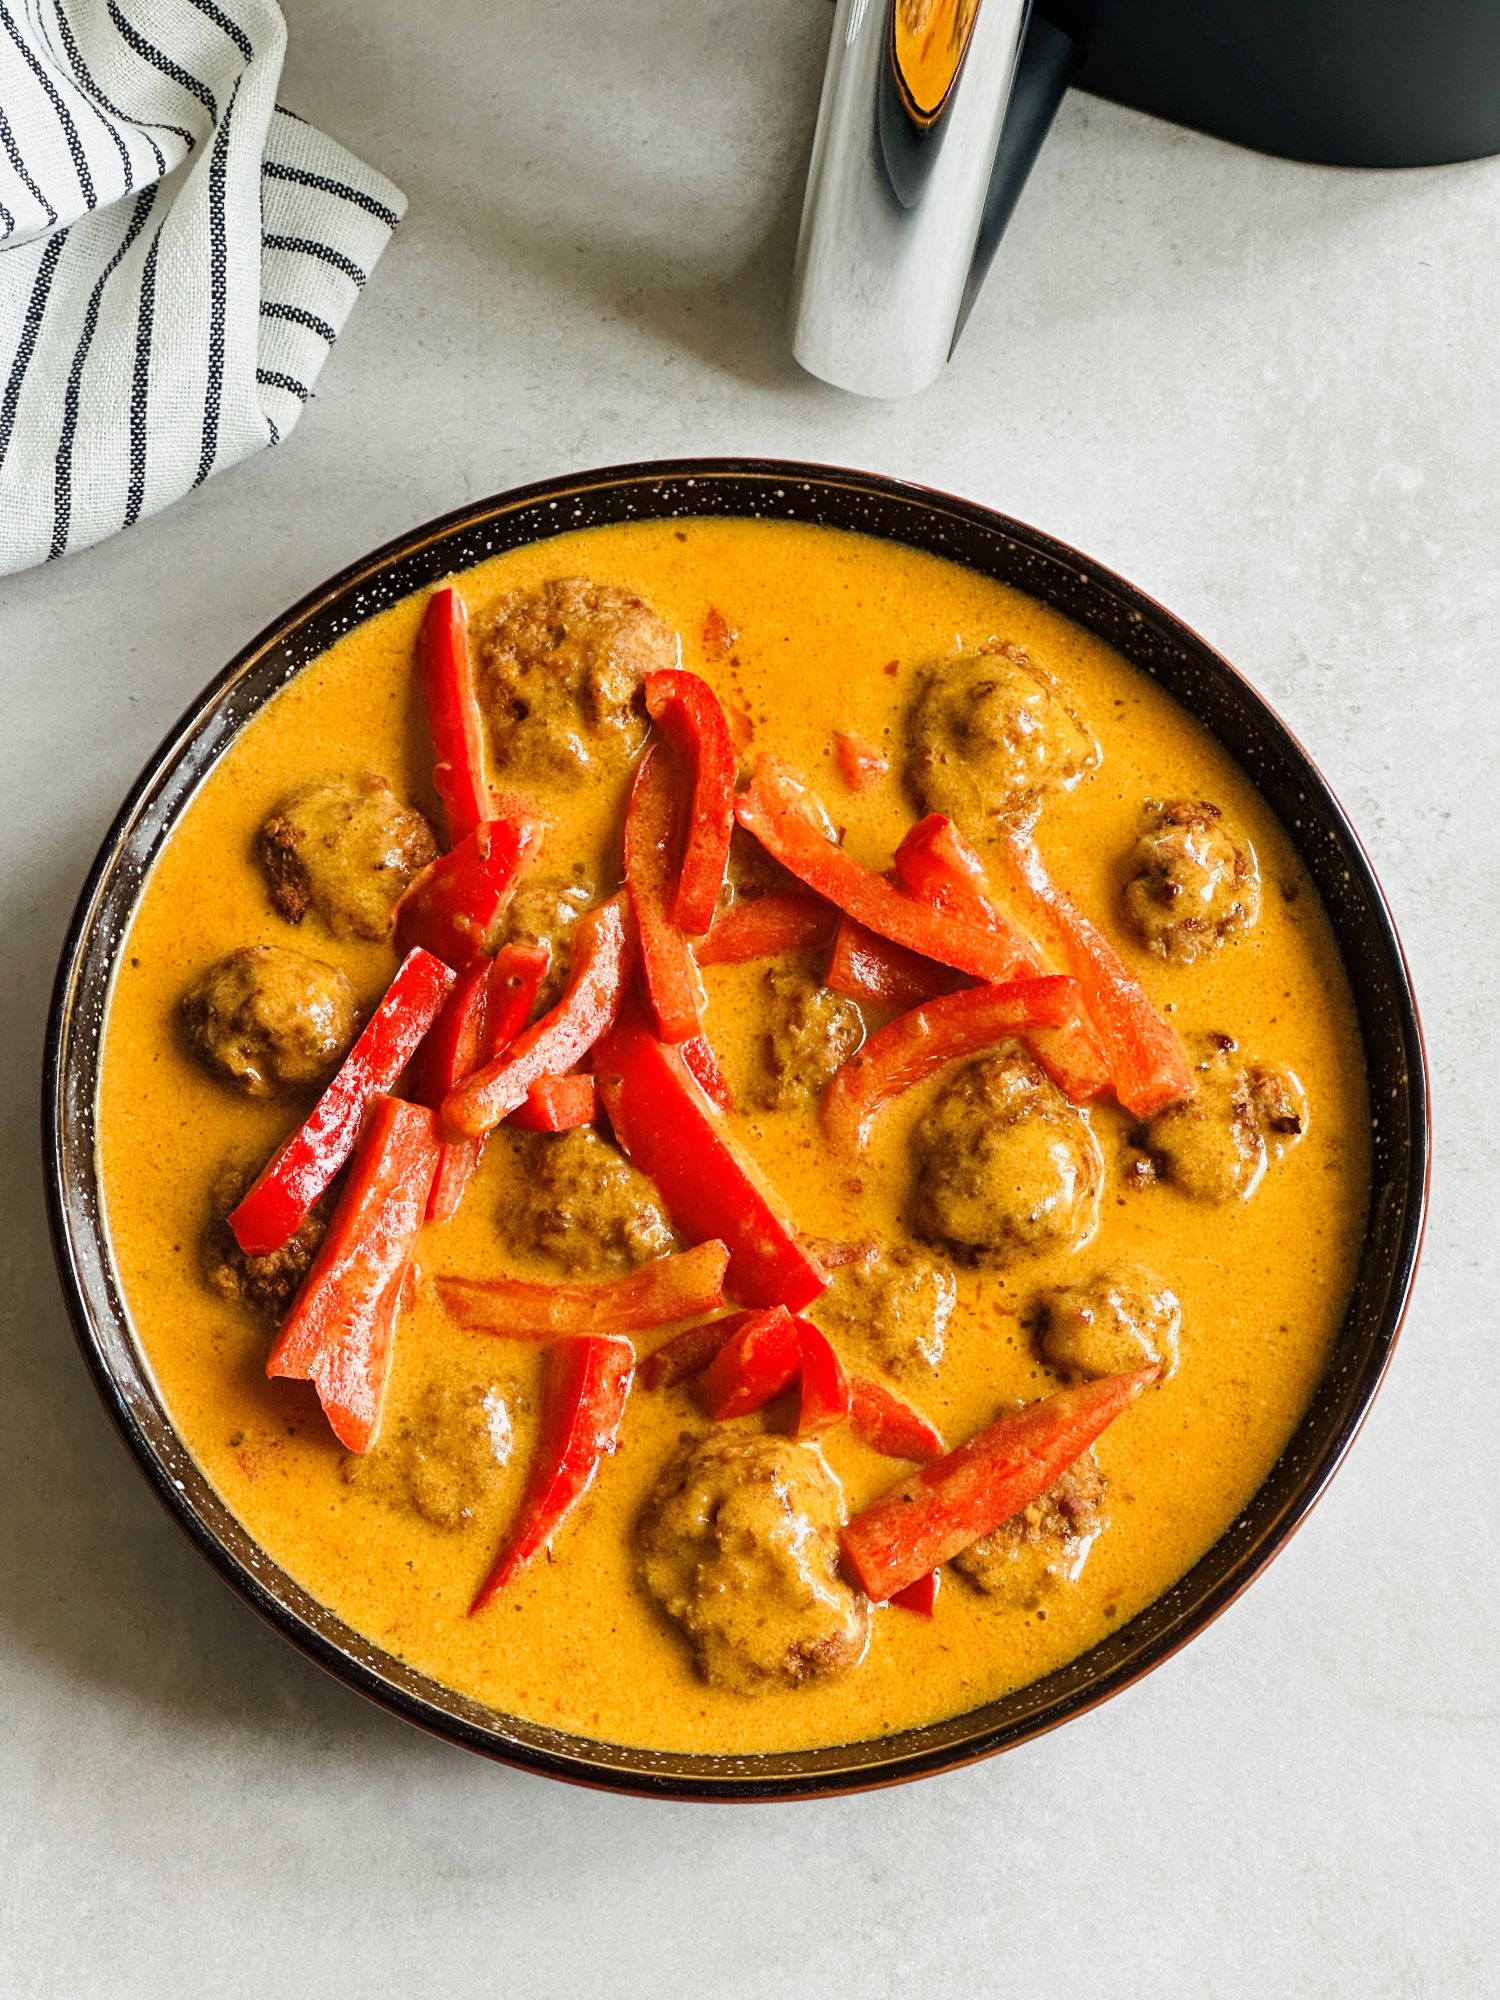 meatballs cooked in air fryer place in bowl with Thai red curry sauce poured over the top